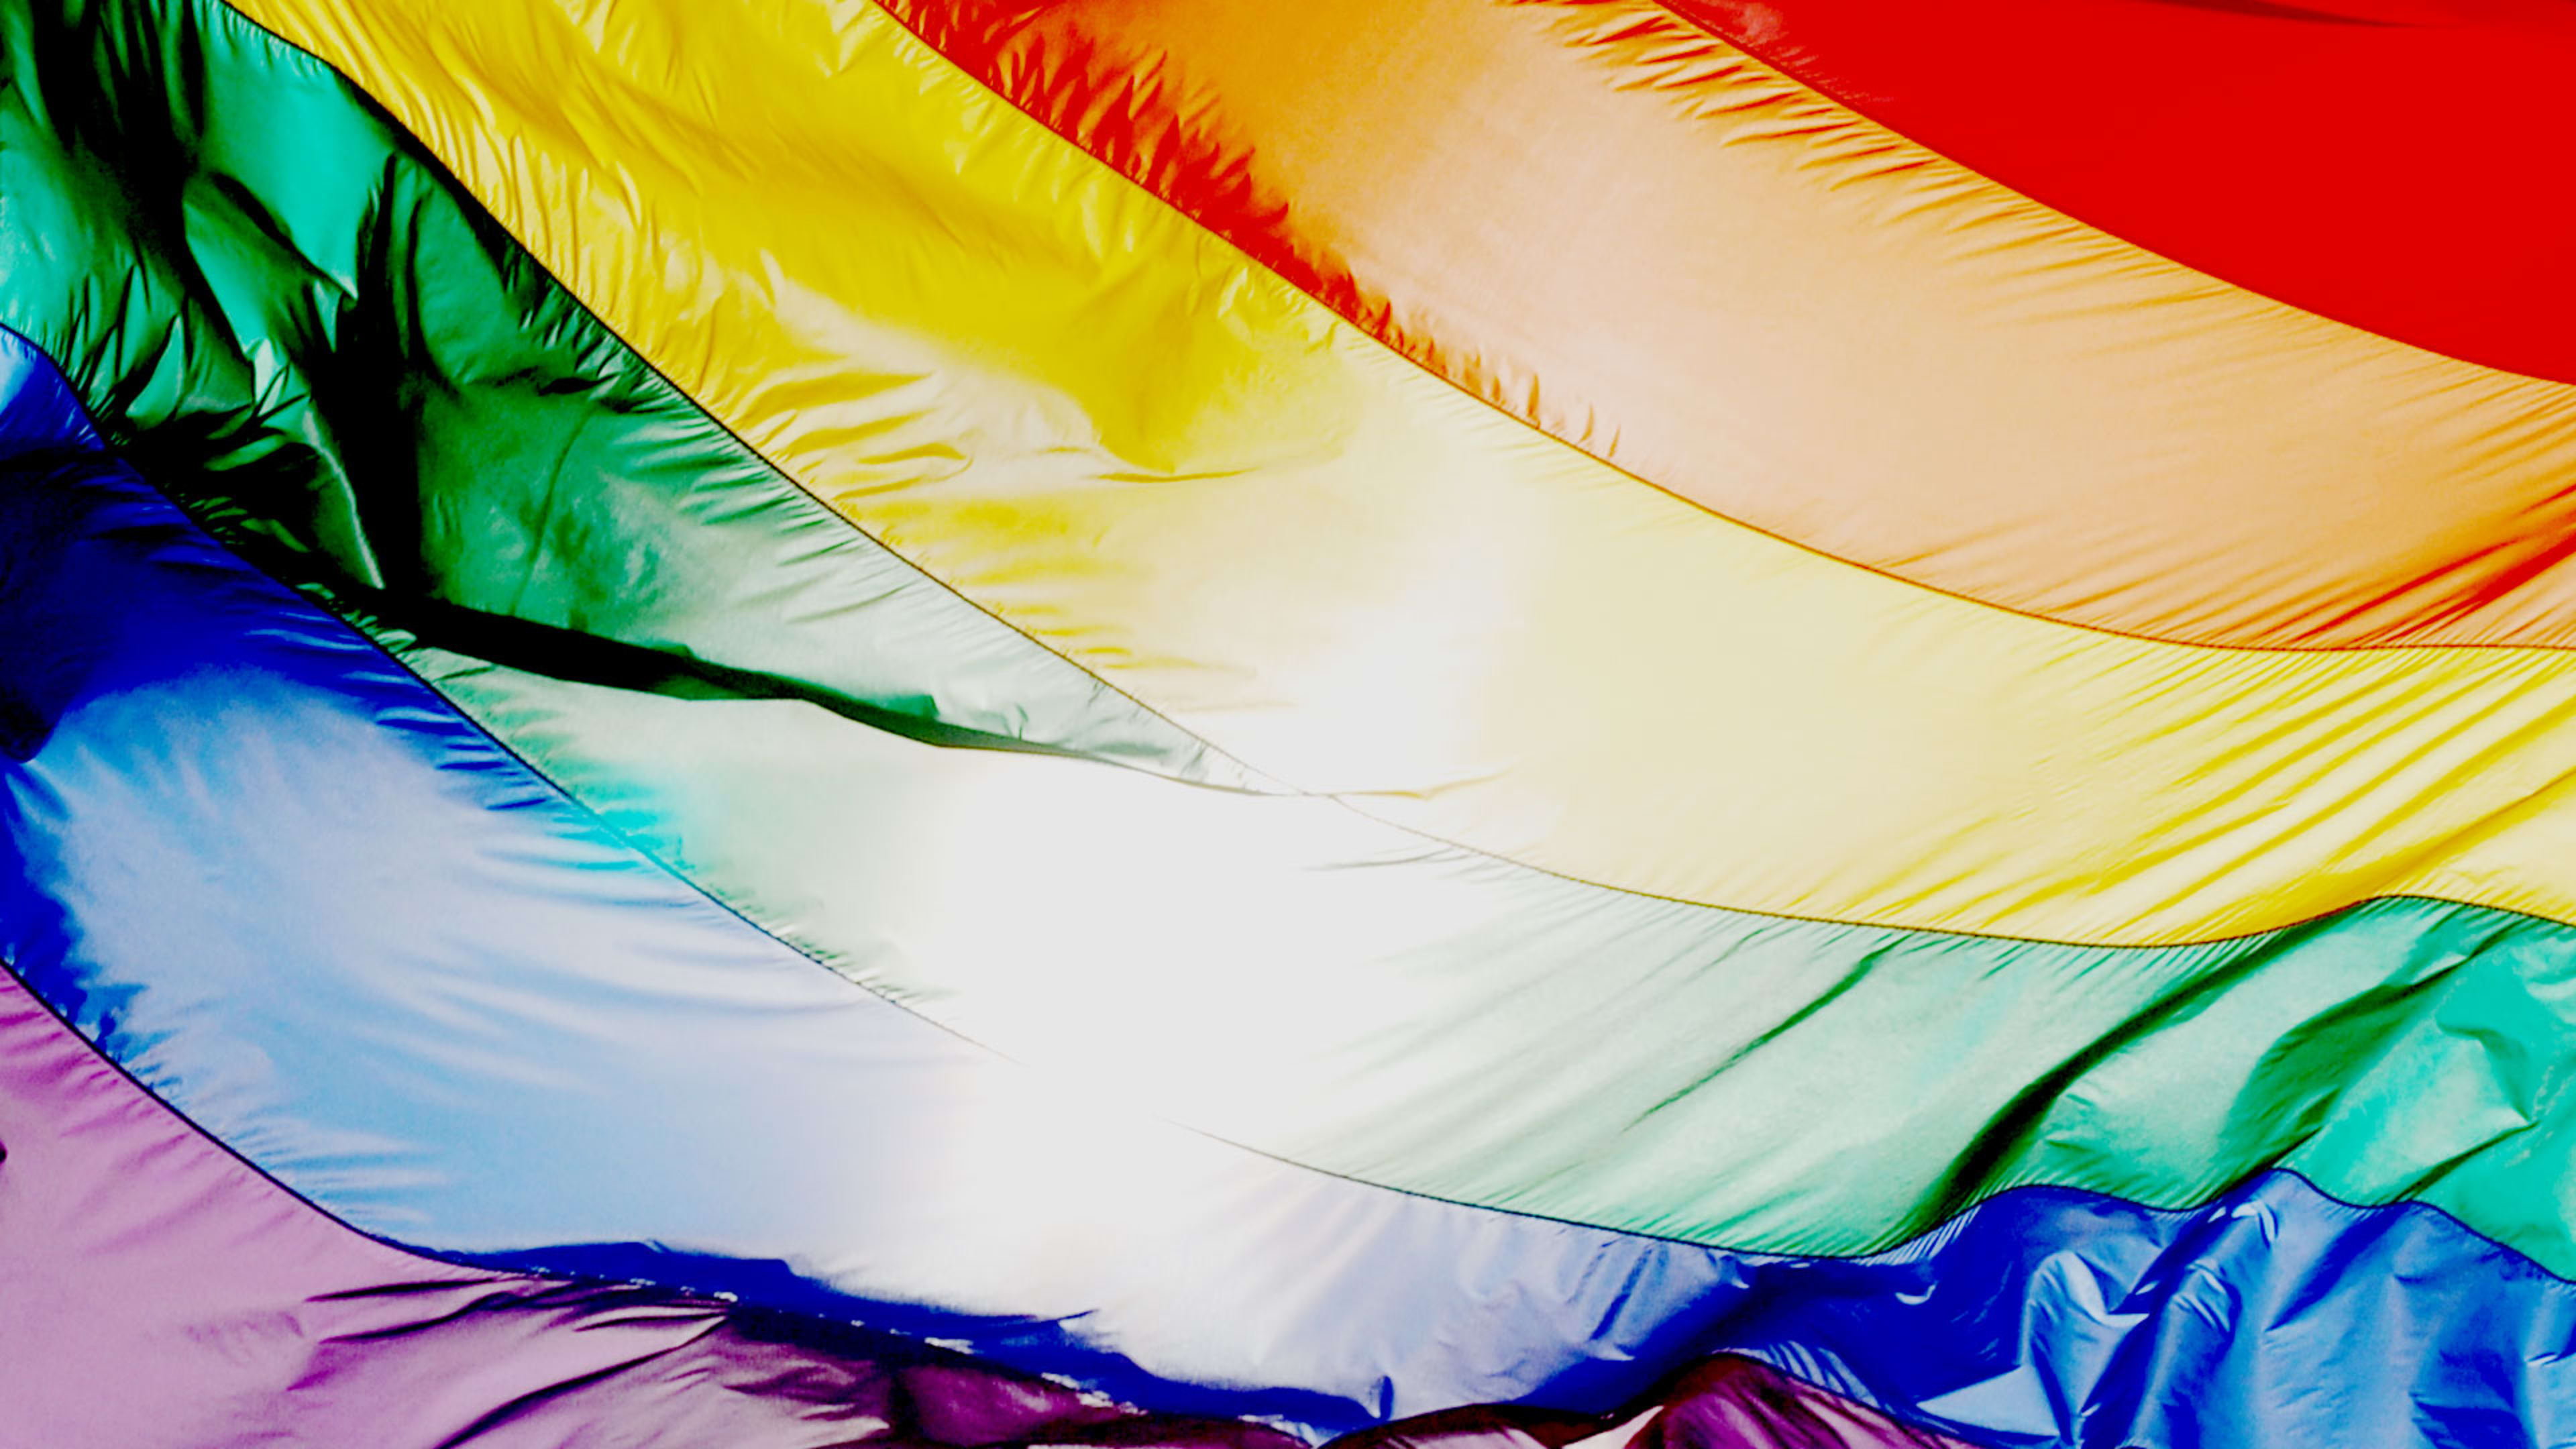 Brands need more than rainbow-colored products if they want to celebrate Pride in 2022